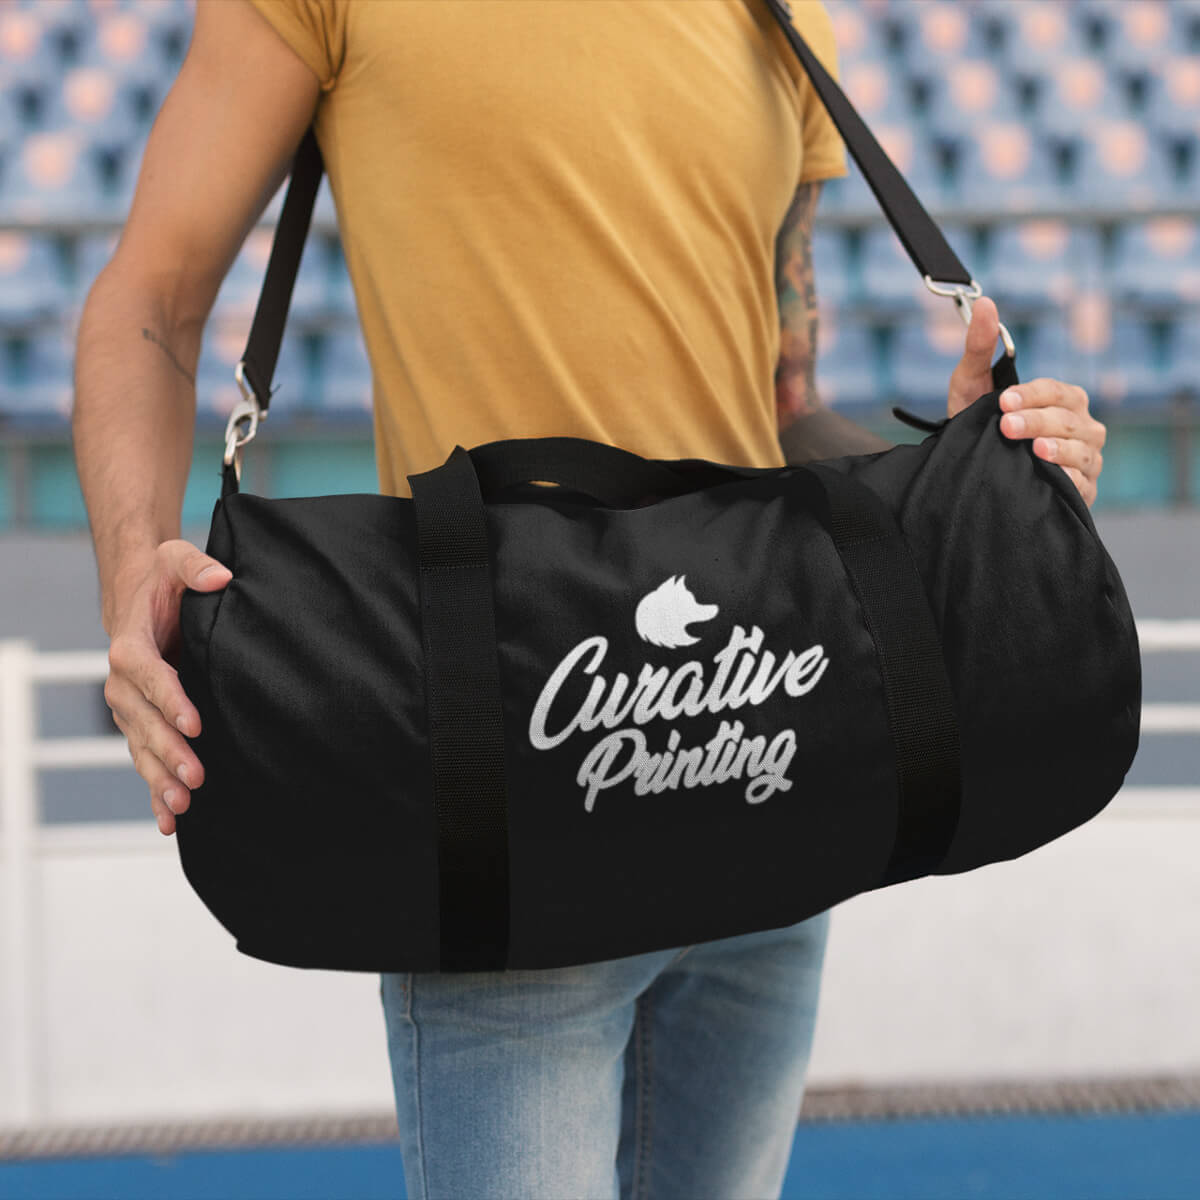 Man carrying black custom promotional duffle bags by curative printing